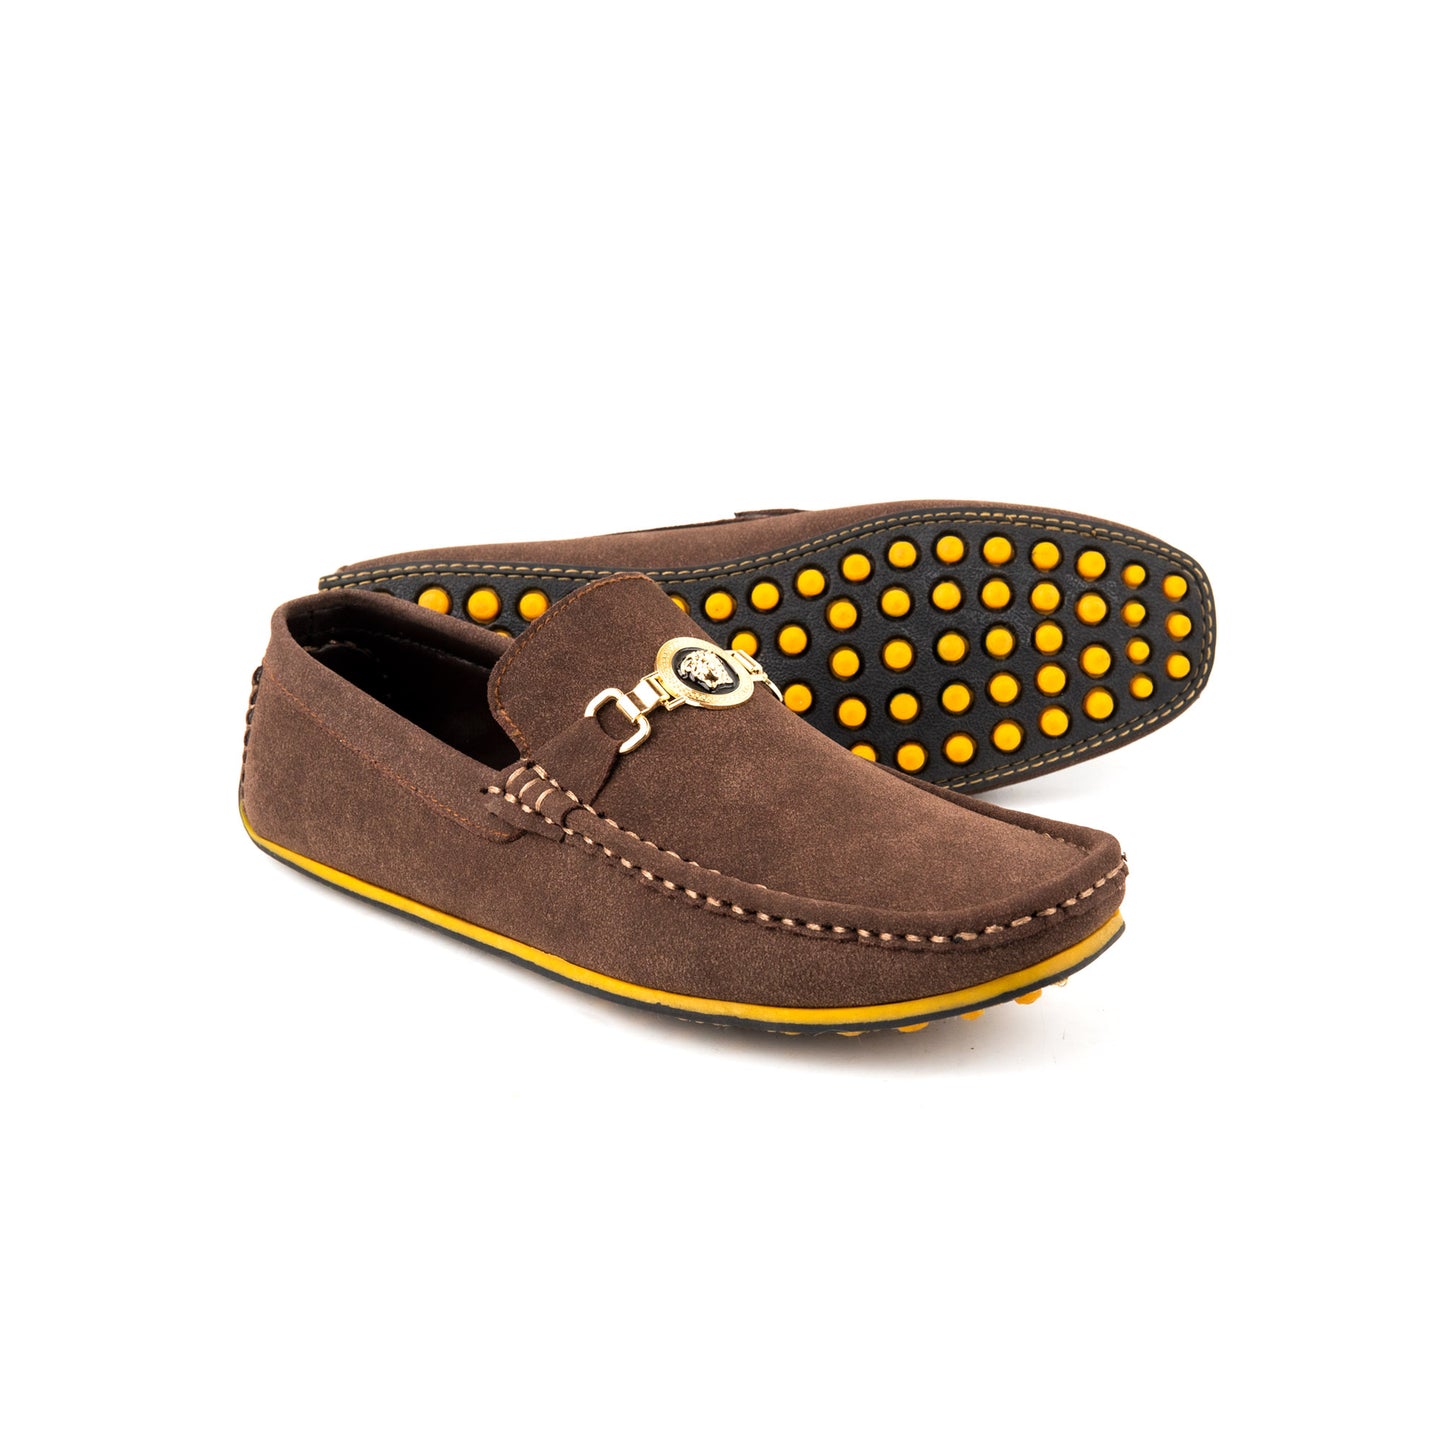 Premium PU Leather Spiral Styled Buckle Moccasins